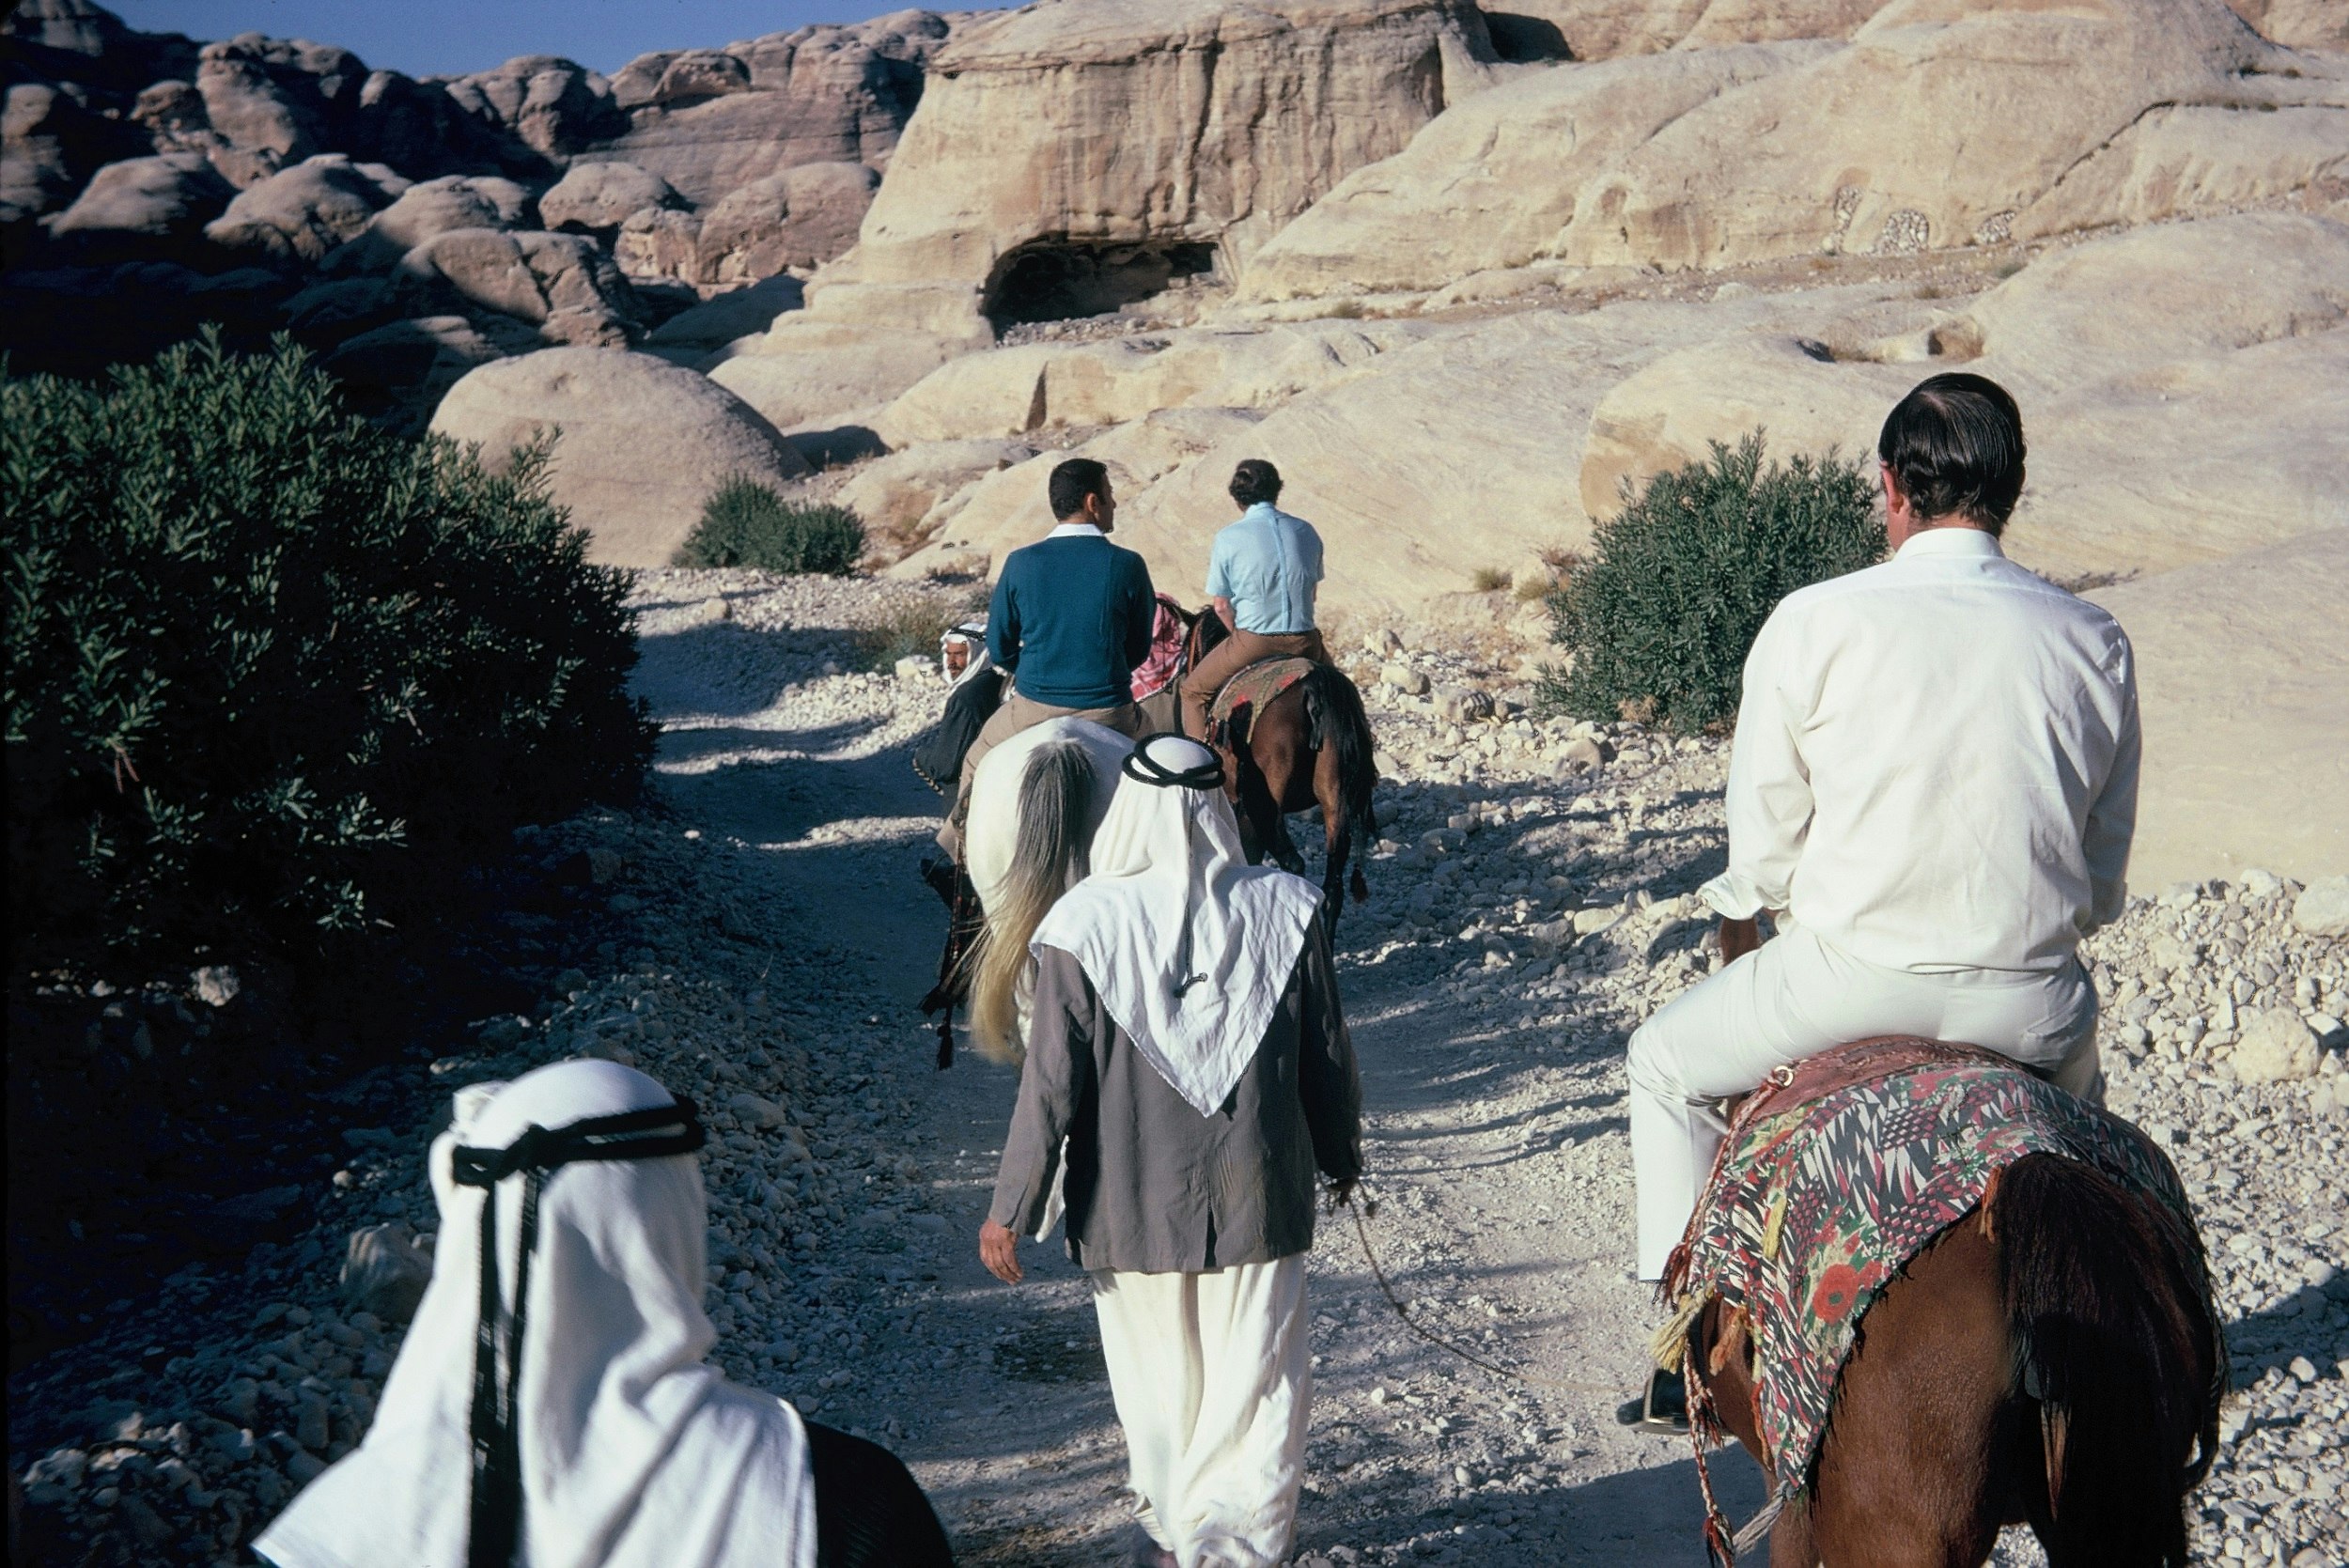 Three men on horseback are led by walking guides wearing Middle Eastern headdress; they are on a stone path leading through rocky mountains.